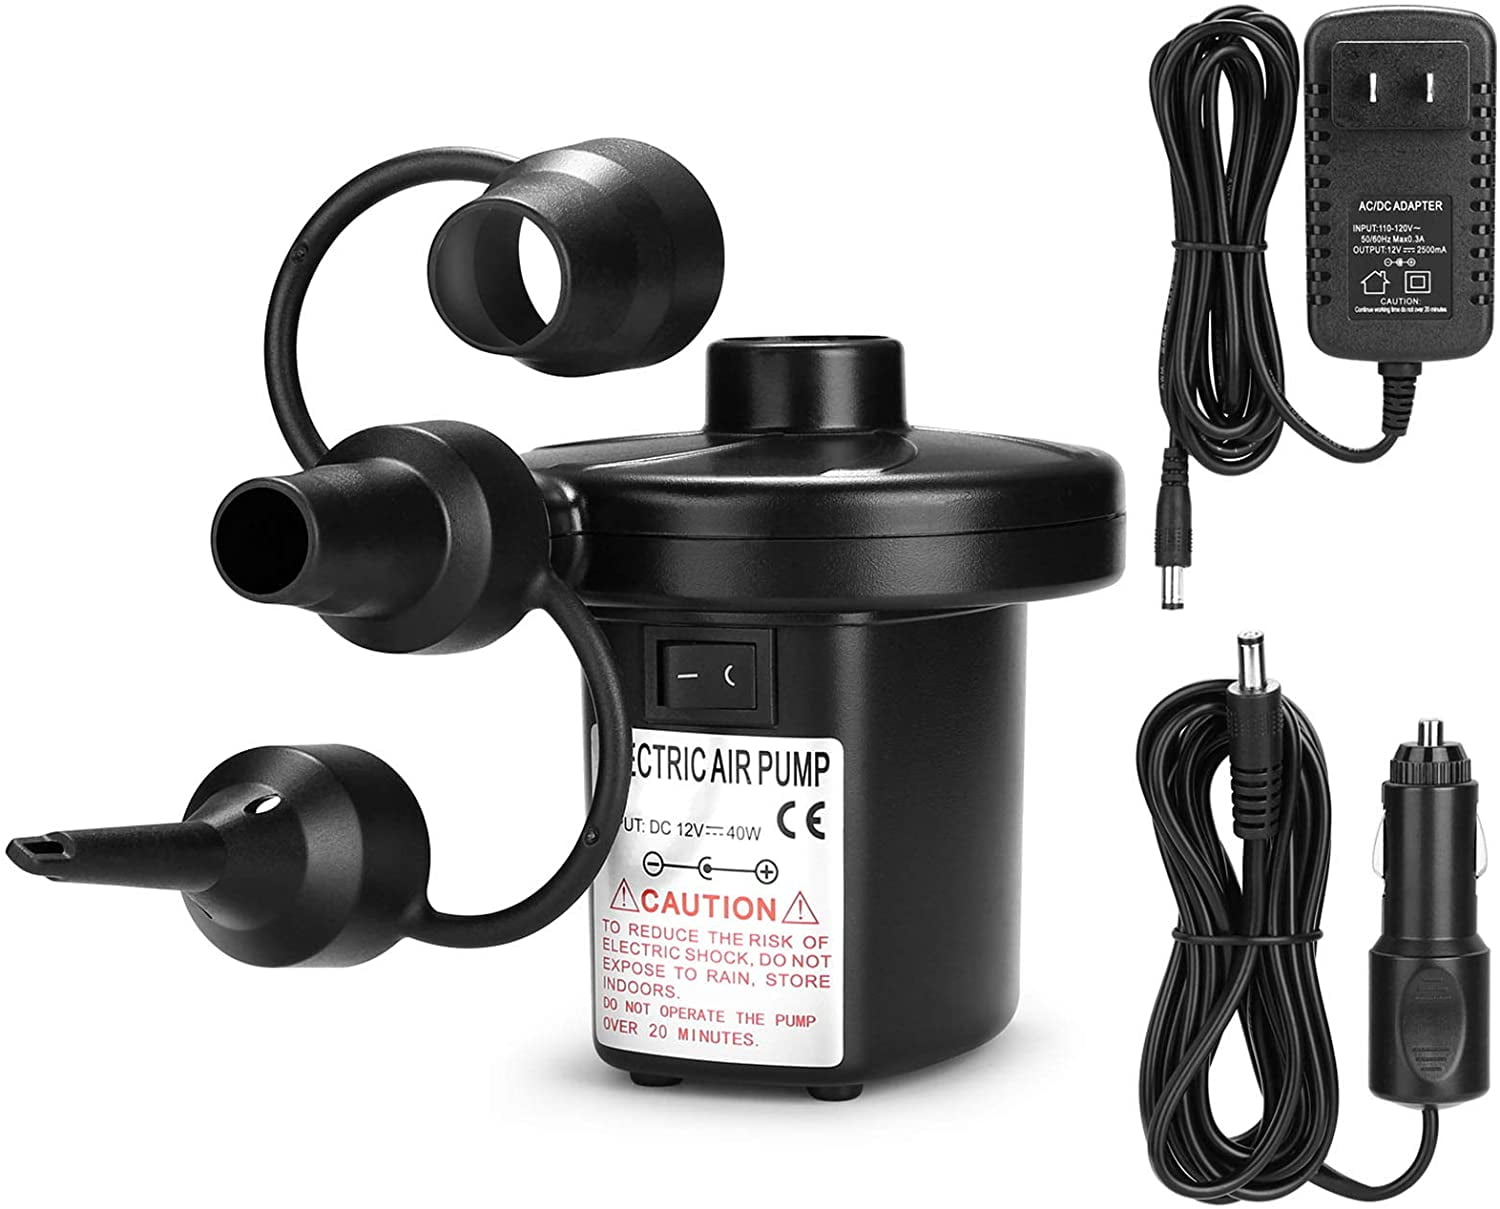 Raft Boat Black 110V AC / 12V DC Swimming Pool Car Charge Pump Quick-Fill Air Mattress Pump with 3 Nozzles Perfect Inflator/Deflator Pumps for Camping Inflatables Air Bed Electric Air Pump Toy 